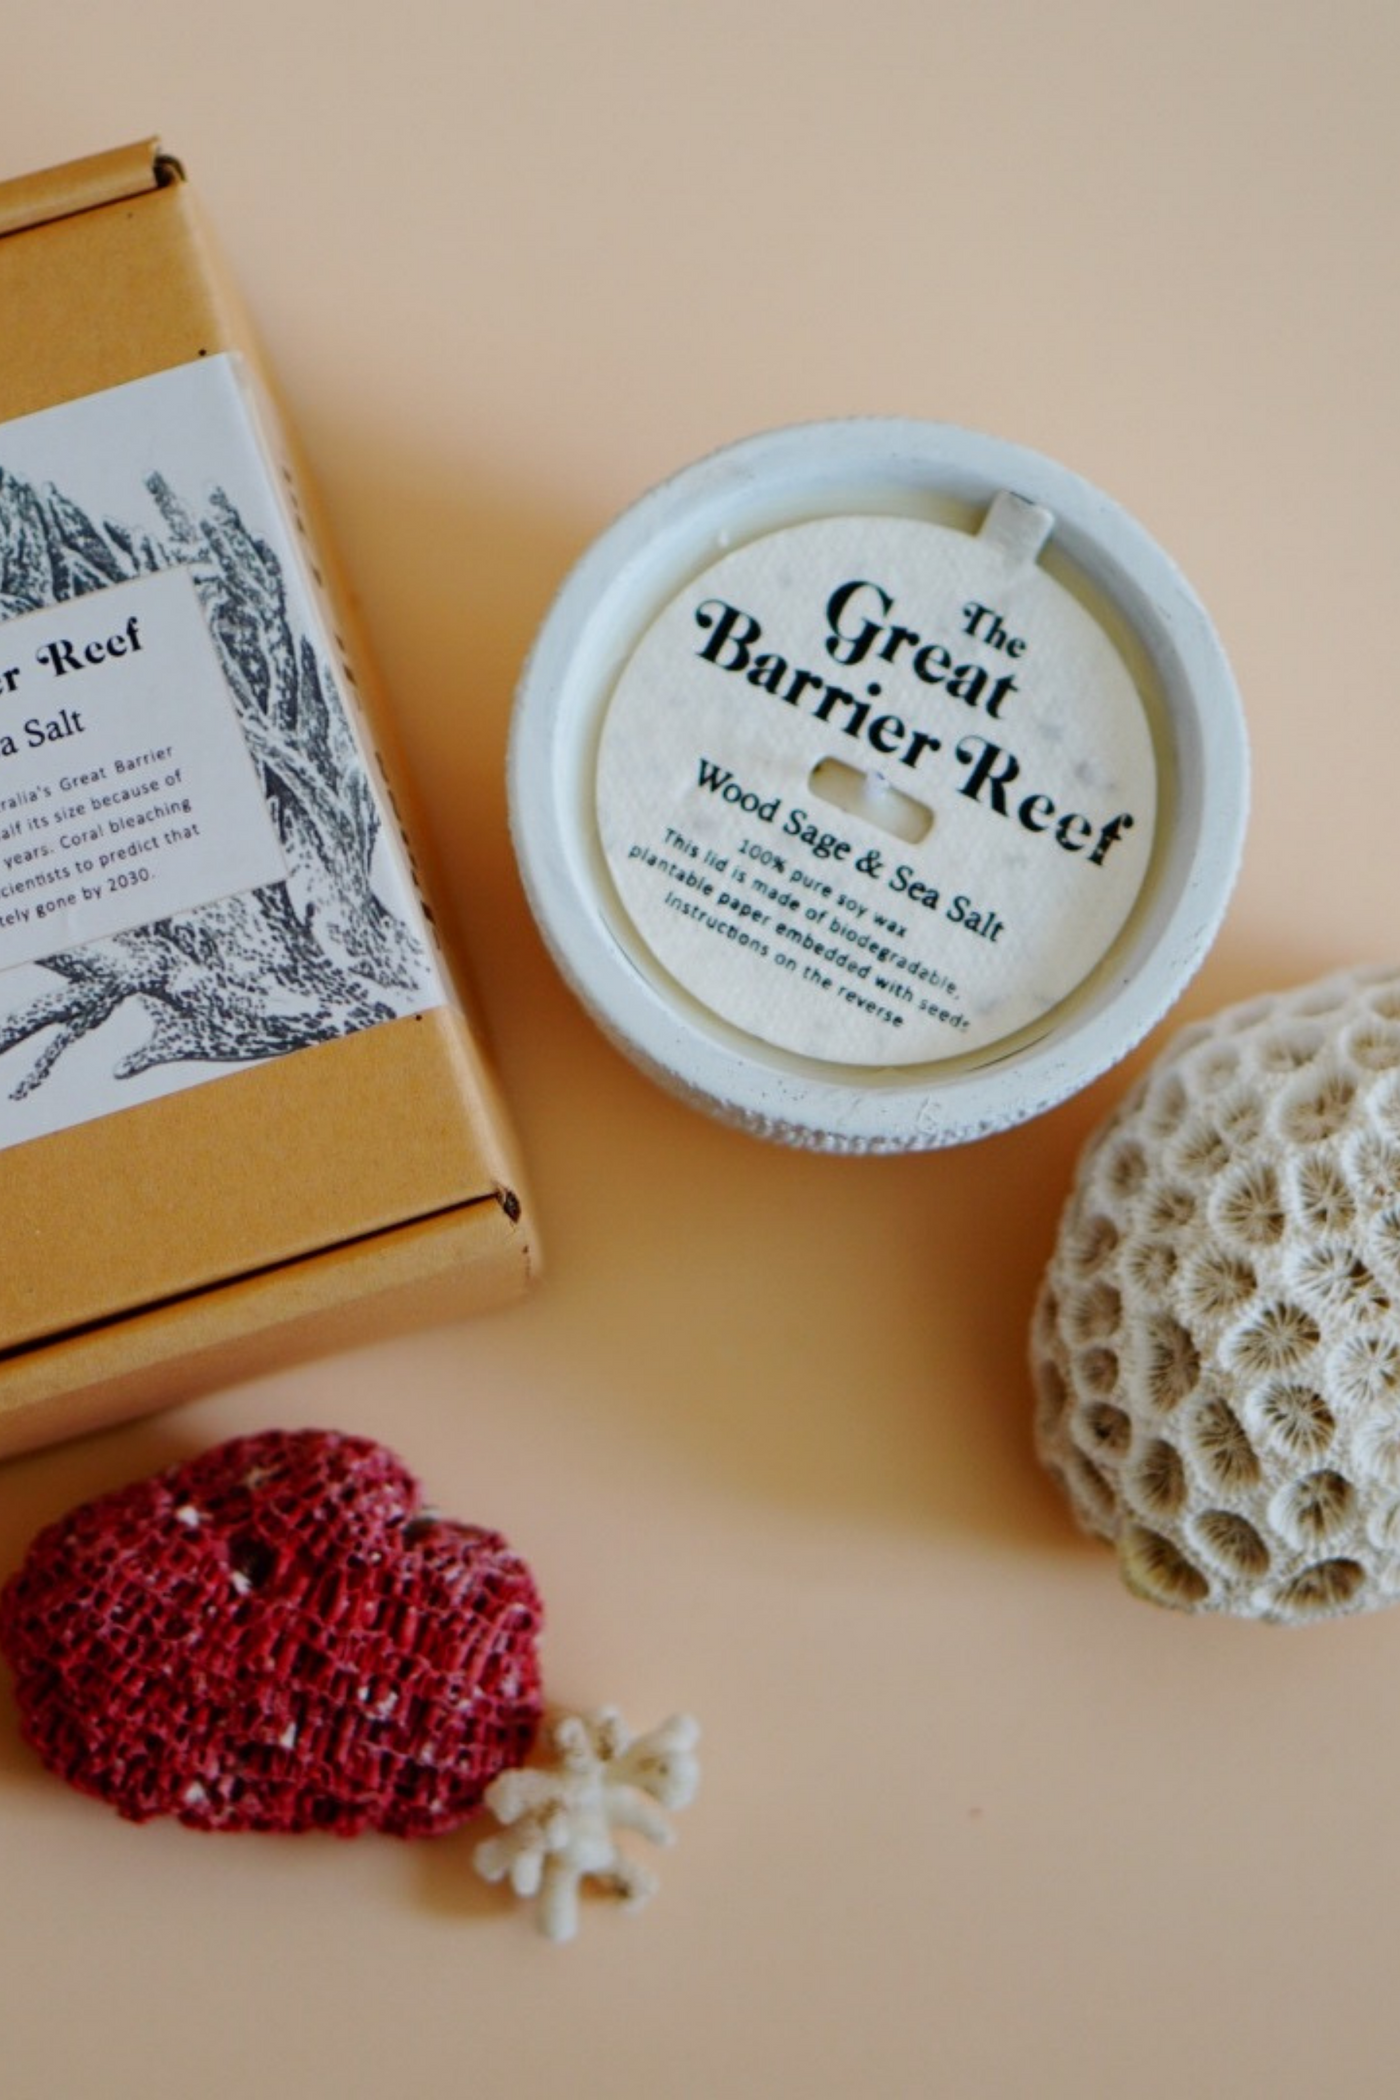 Pass It On Candle in Great Barrier Reef (Wood Sage & Sea Salt), available on ZERRIN